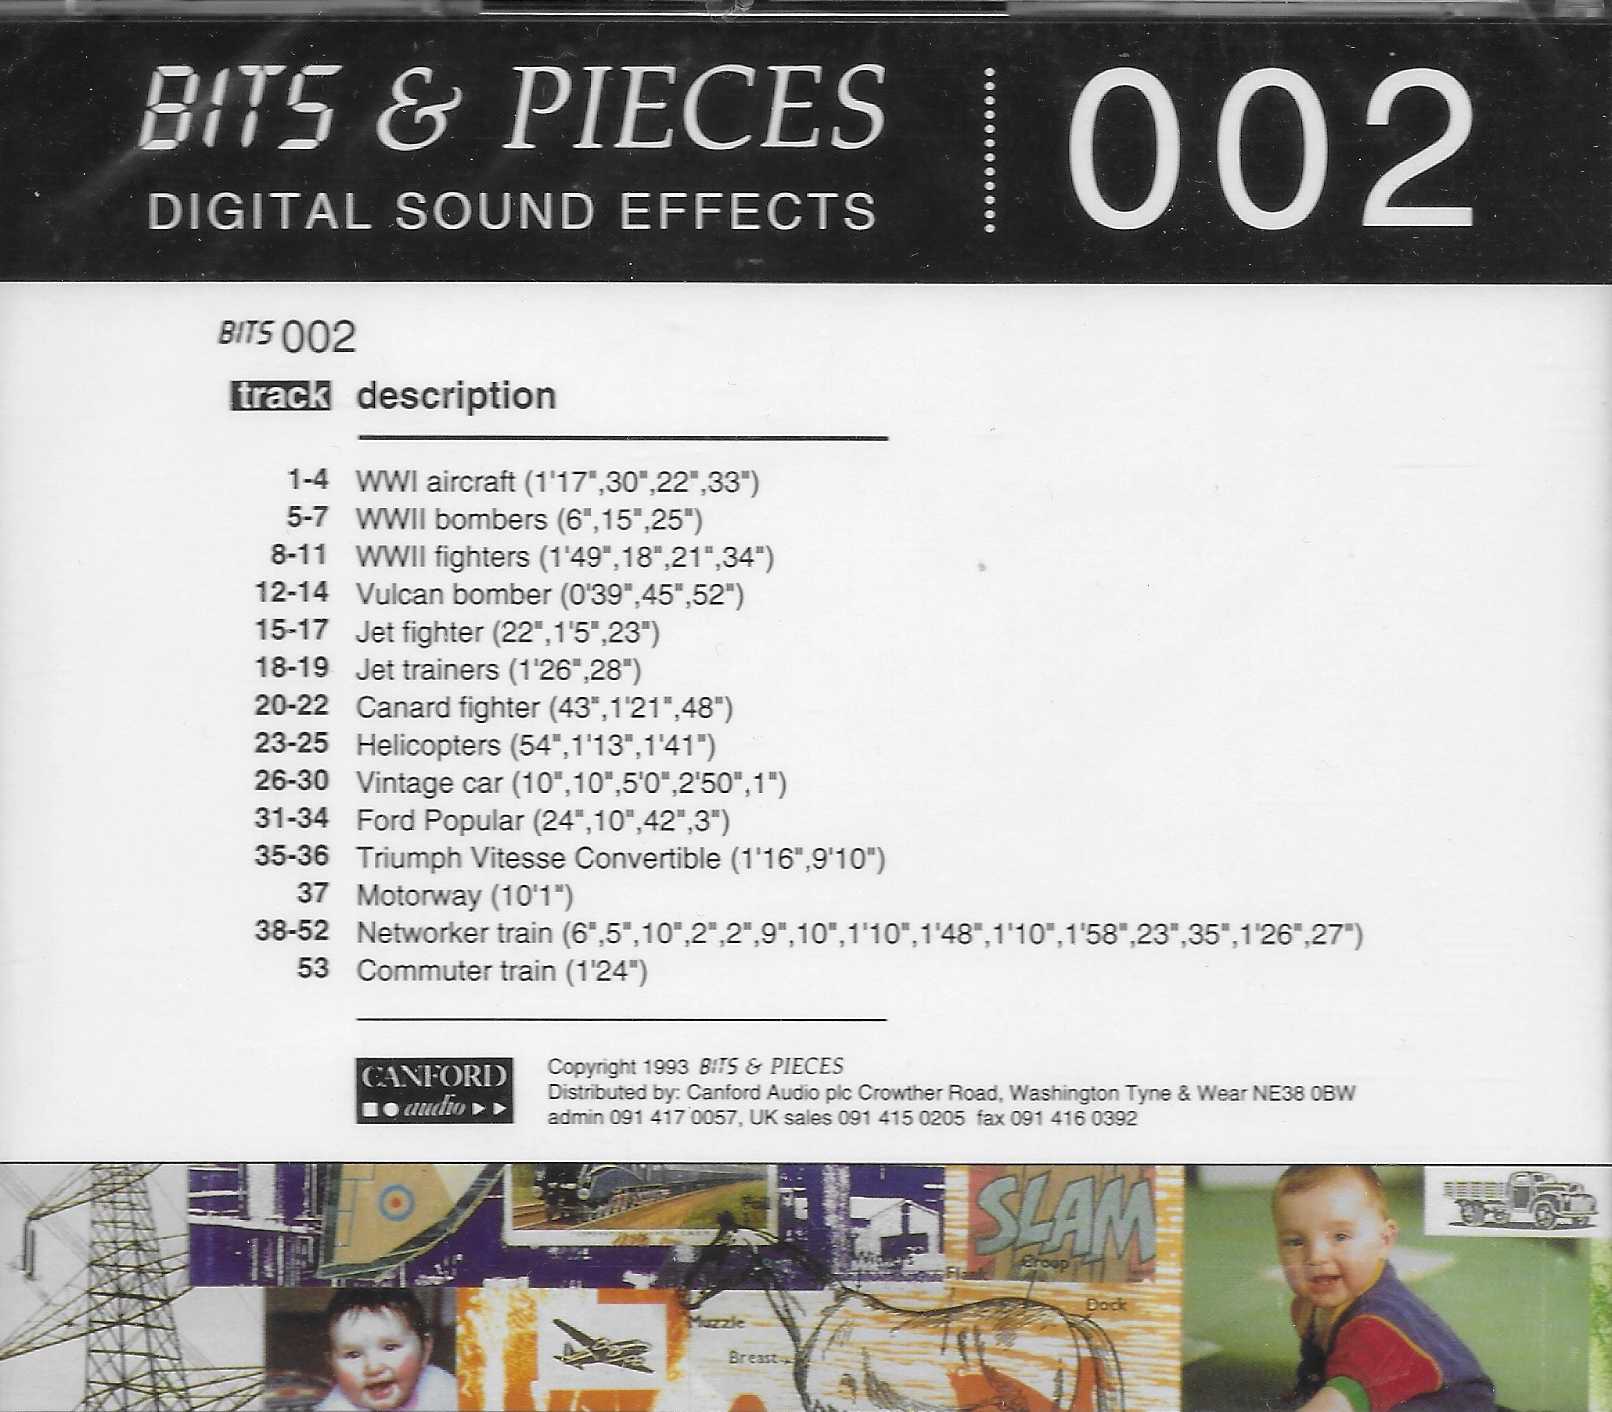 Picture of BITS 002 Bits & pieces digital sound effects 002 by artist Various from ITV, Channel 4 and Channel 5 library